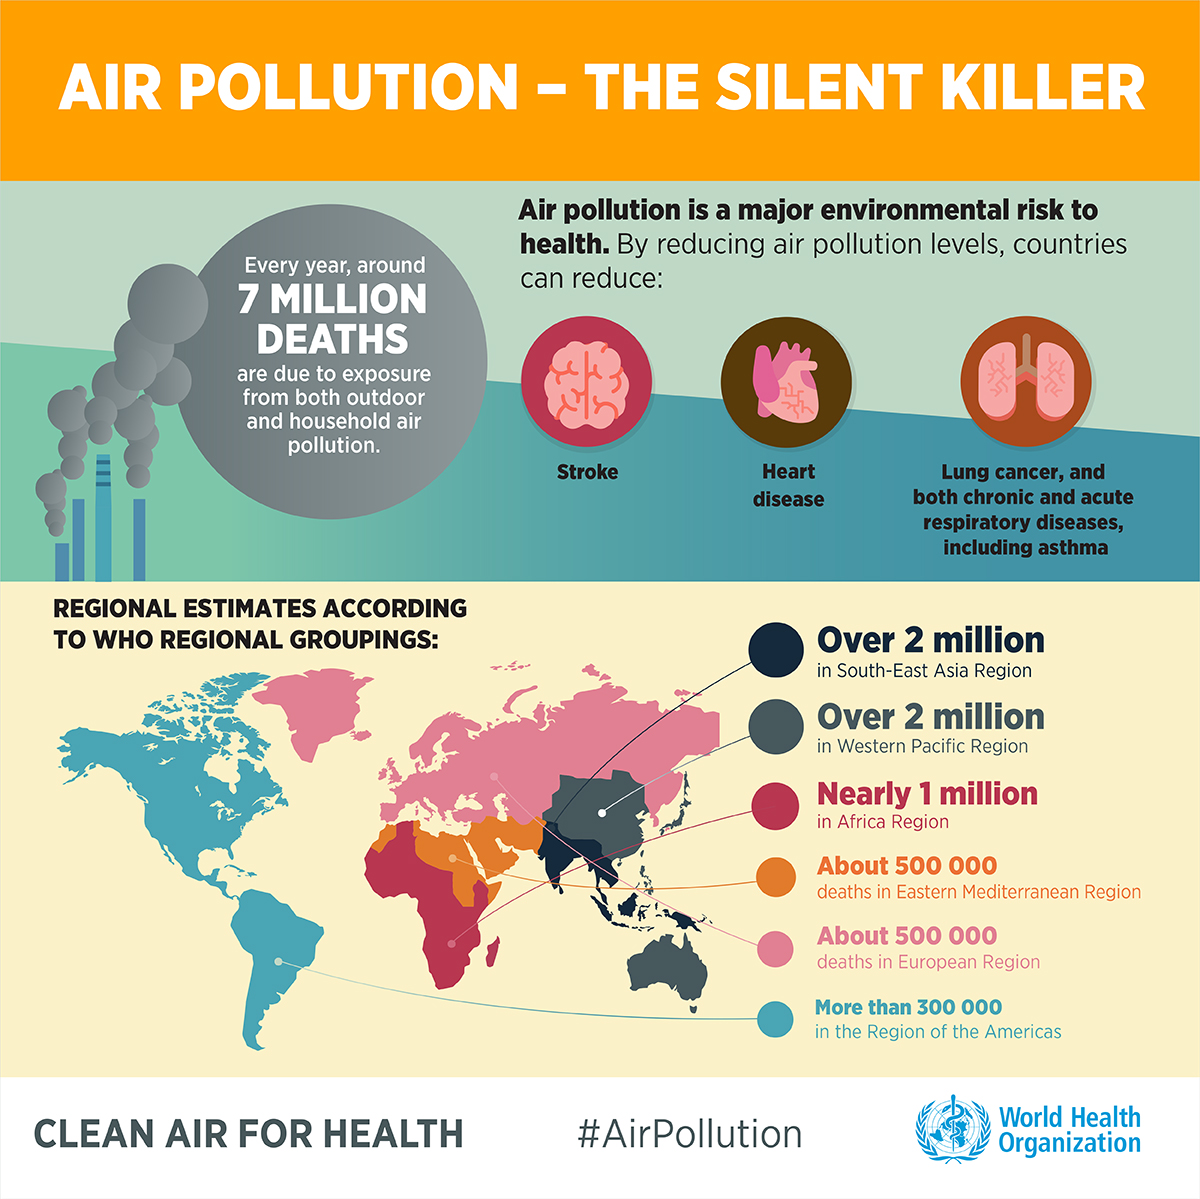 Air pollution accounts for premature deaths from cardiovascular disease